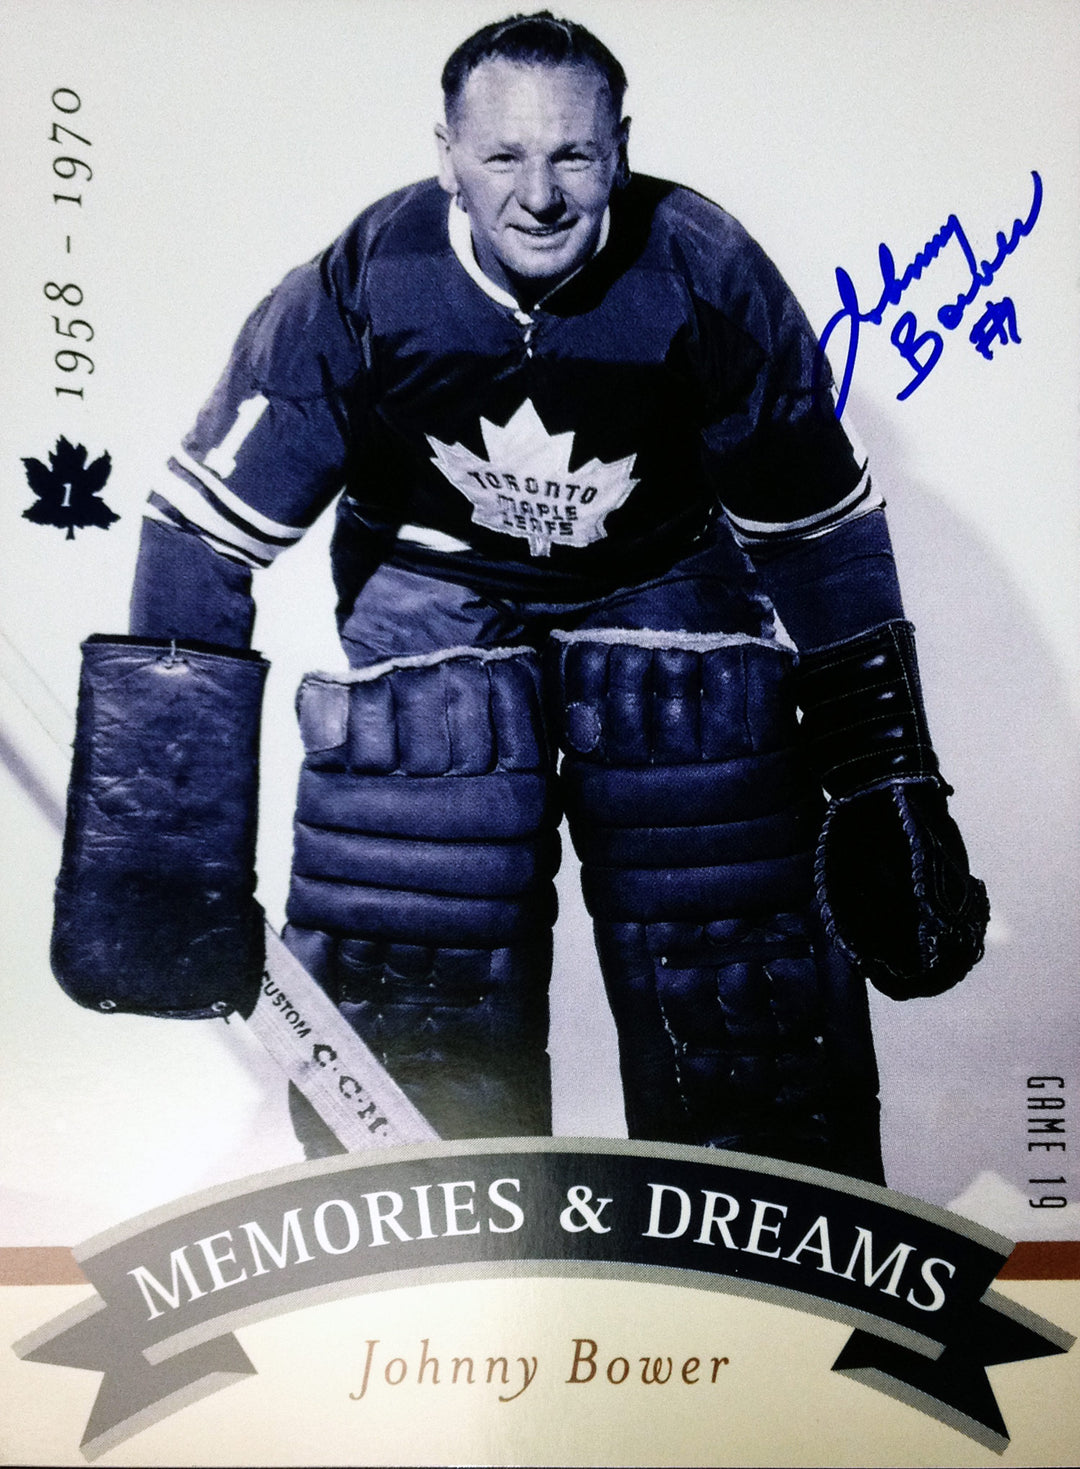 Memories Dreams 8X10 Signed By Johnny Bower (Crouch) Toronto Maple Leafs, Toronto Maple Leafs, NHL, Hockey, Autographed, Signed, AAHPH30310